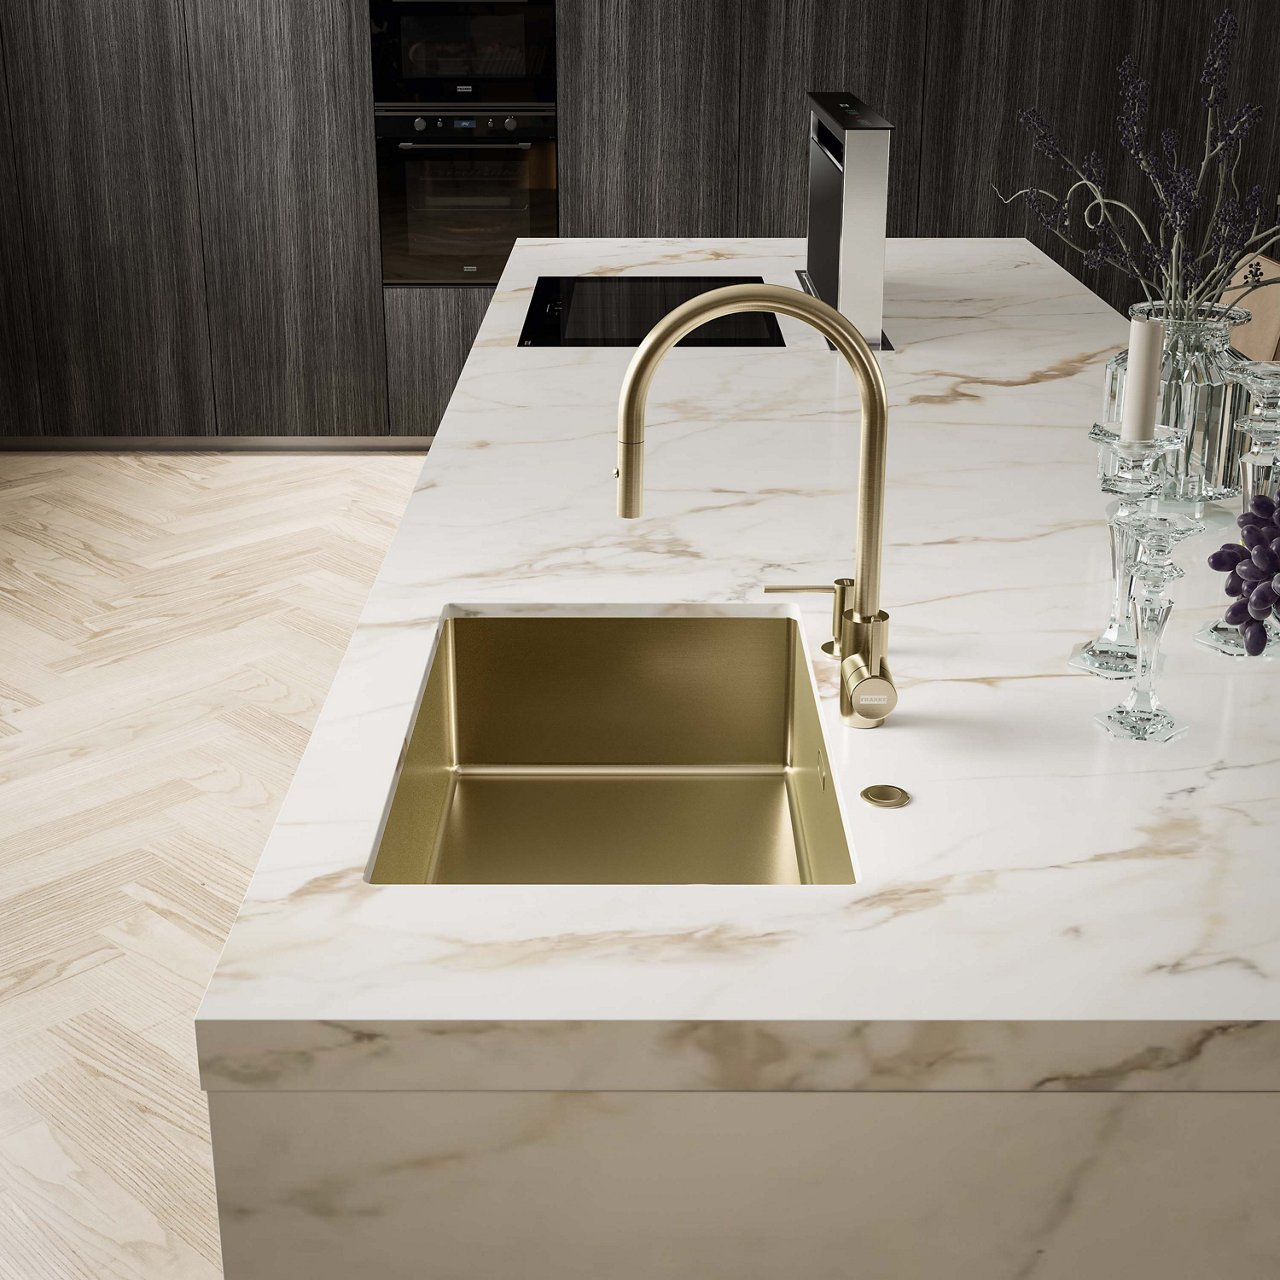 High-End light kitchen with white marble counters featuring a gold Mythos Masterpiece undermount sink with matching pull down faucet and soap dispenser